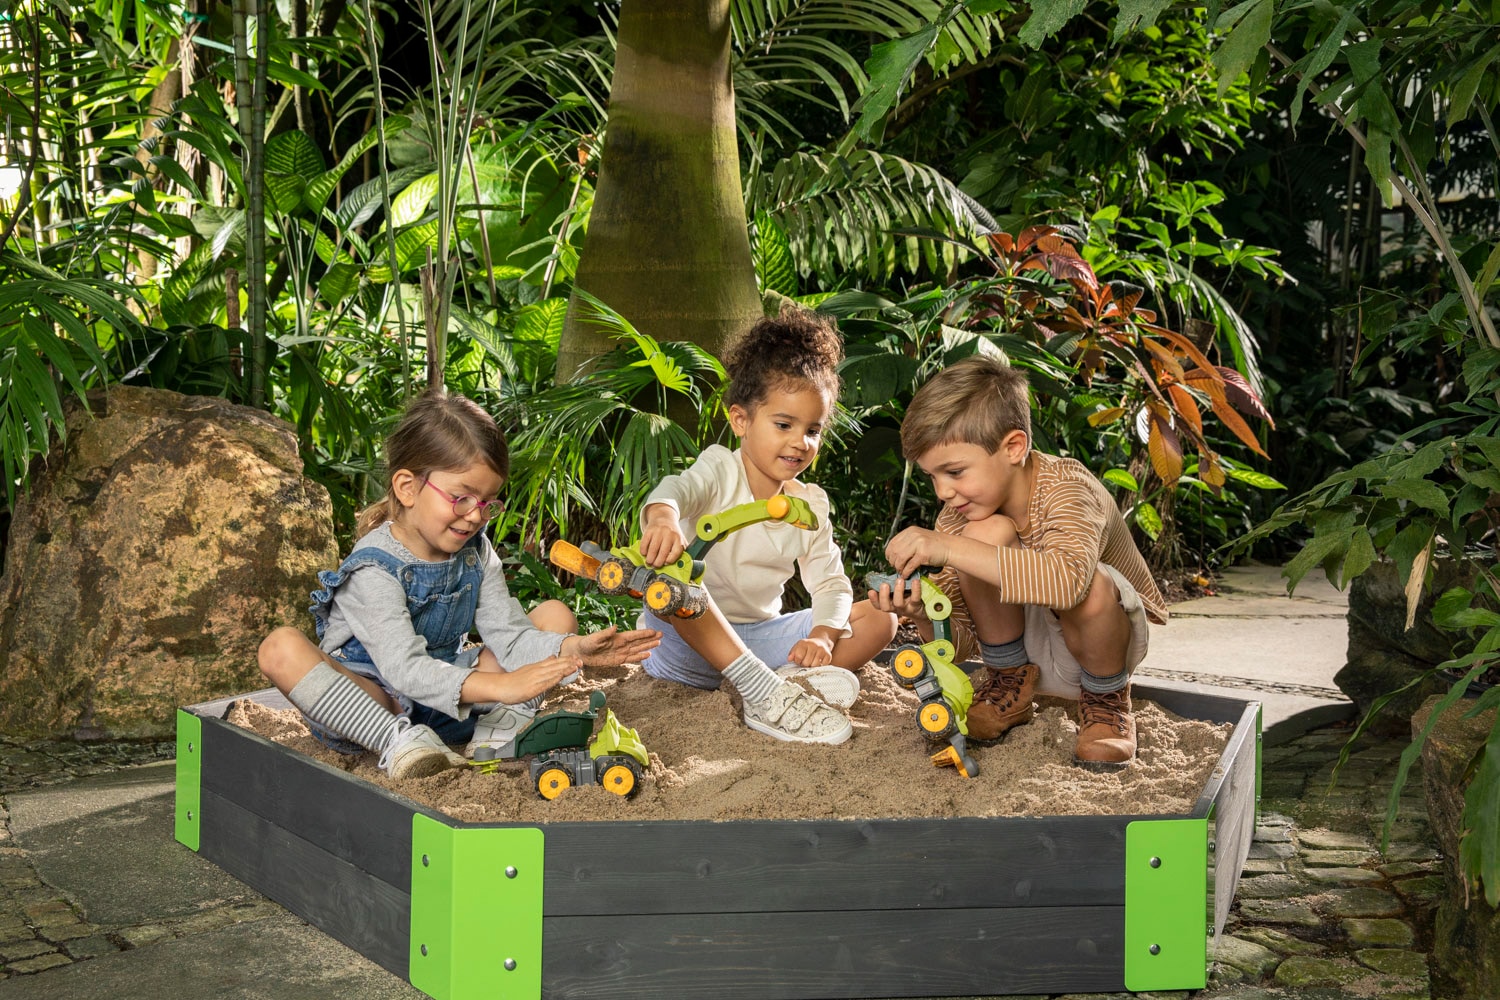 BIG Spielzeug-Bagger »Power Worker Mini Dino Diplodocus«, Made in Germany